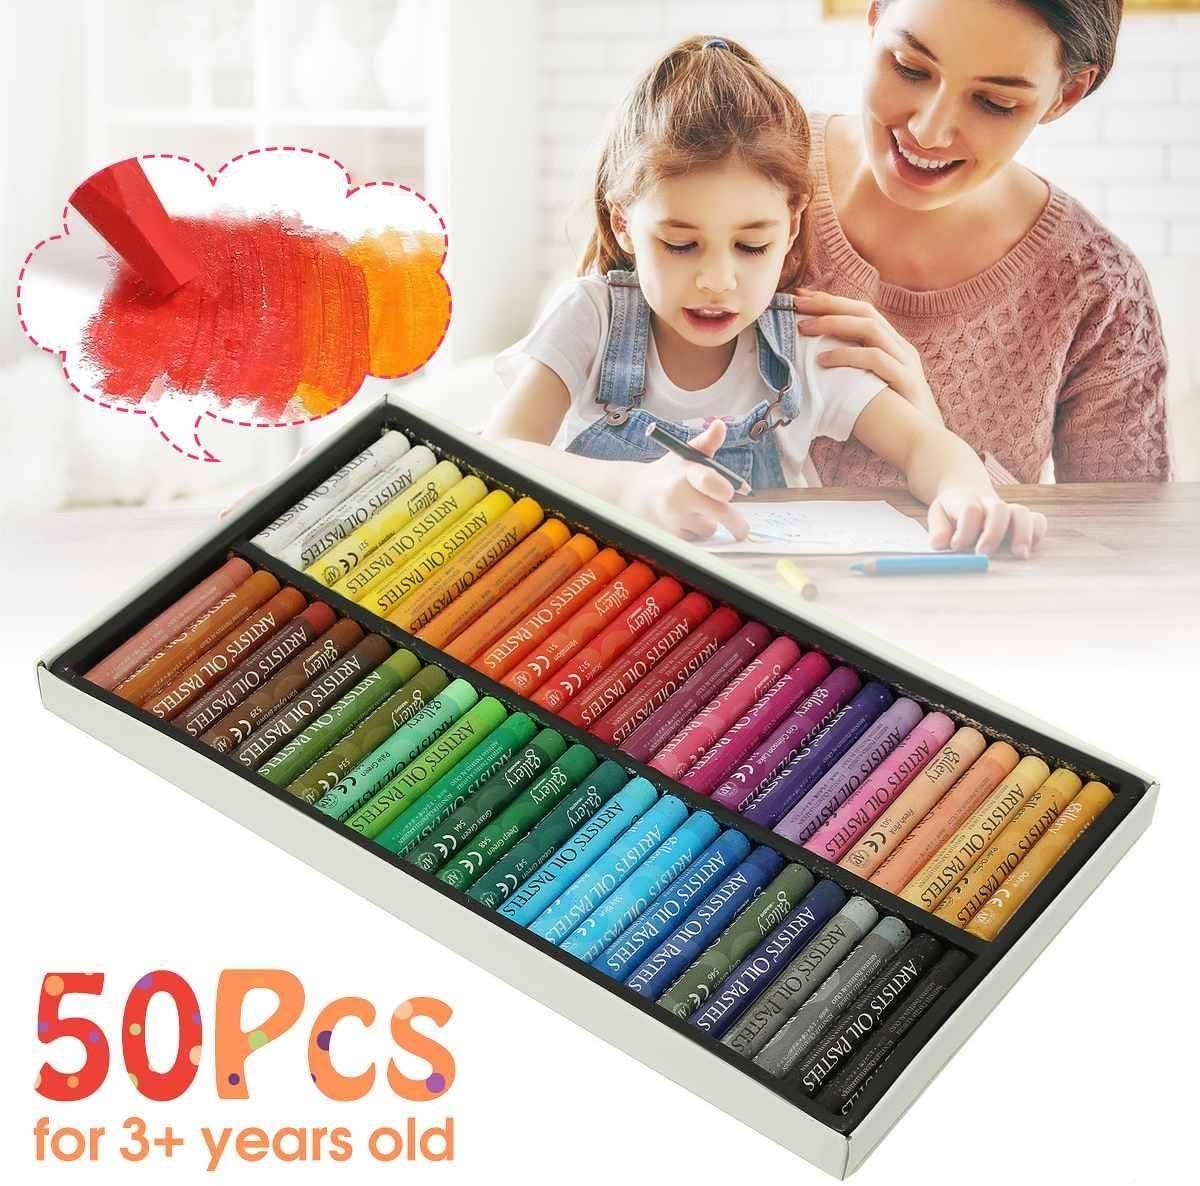 12 Colors Oil Pastels Smooth Drawing Oil Pastels Set Brilliant Colored Pastels  for Artists Beginners Students Kids Art Painting Drawing